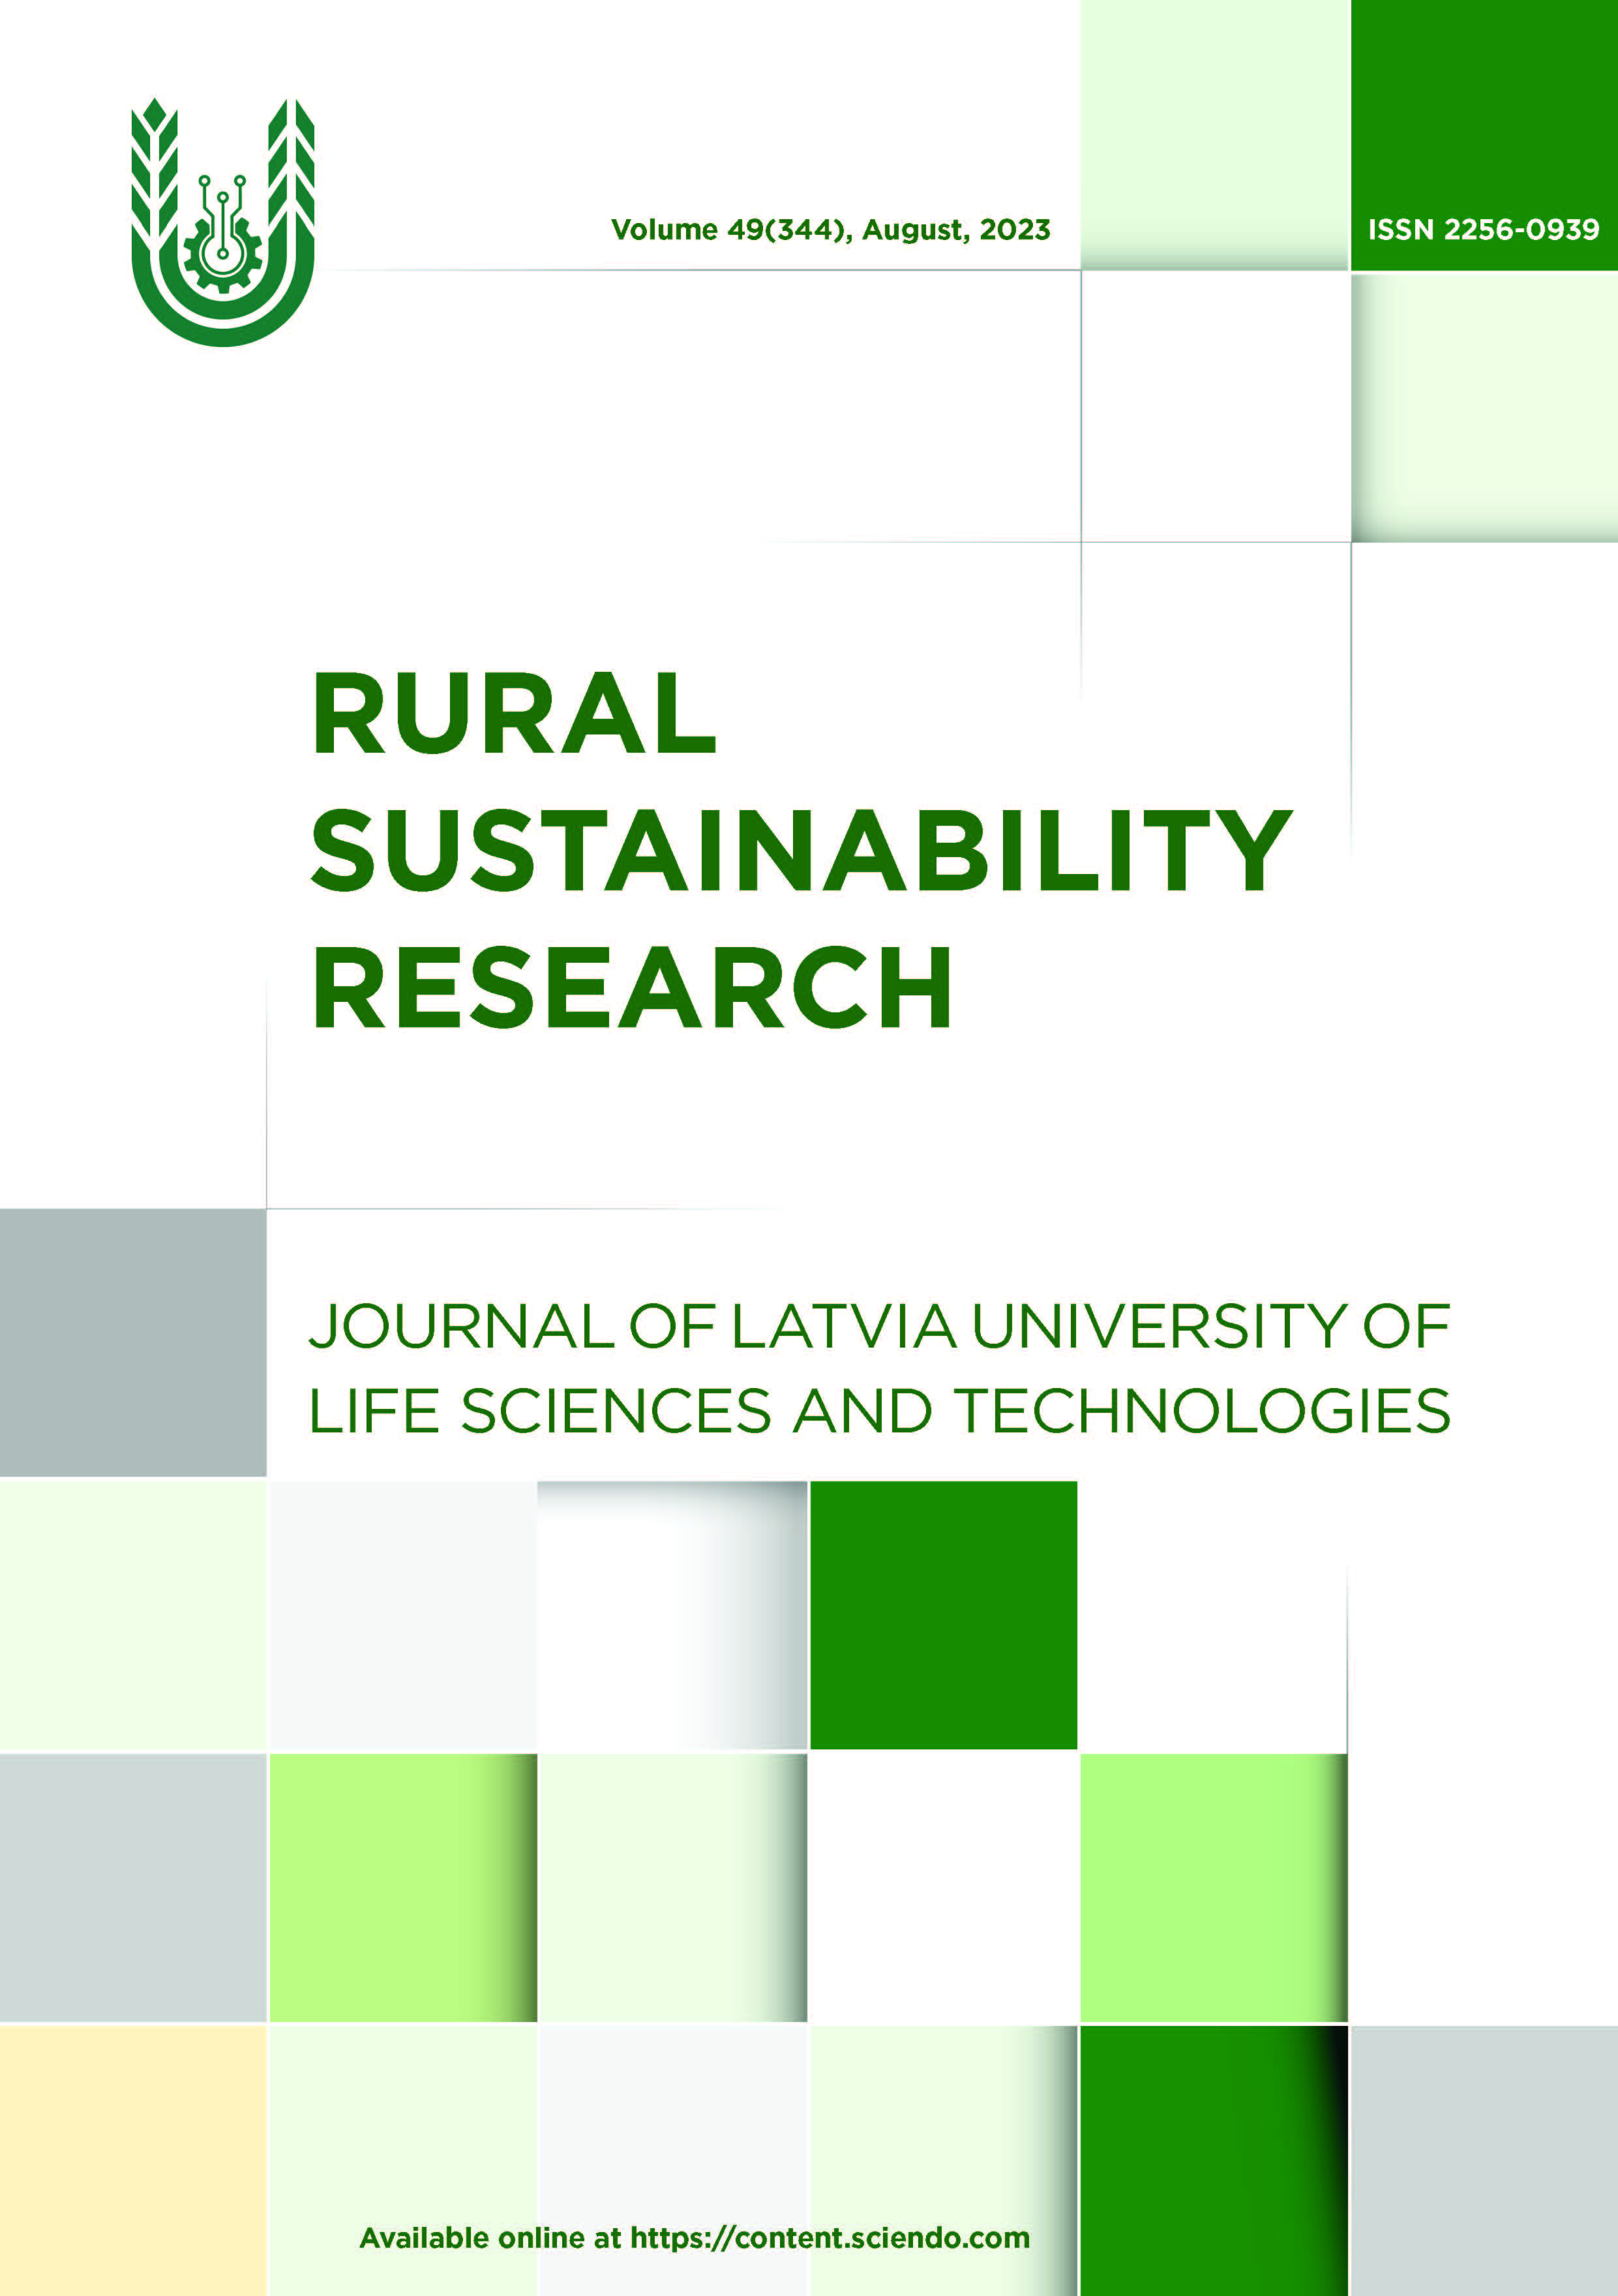 "Rural Sustainability Research. Former: Proceedings of the Latvia University of Life Sciences and Technologies"